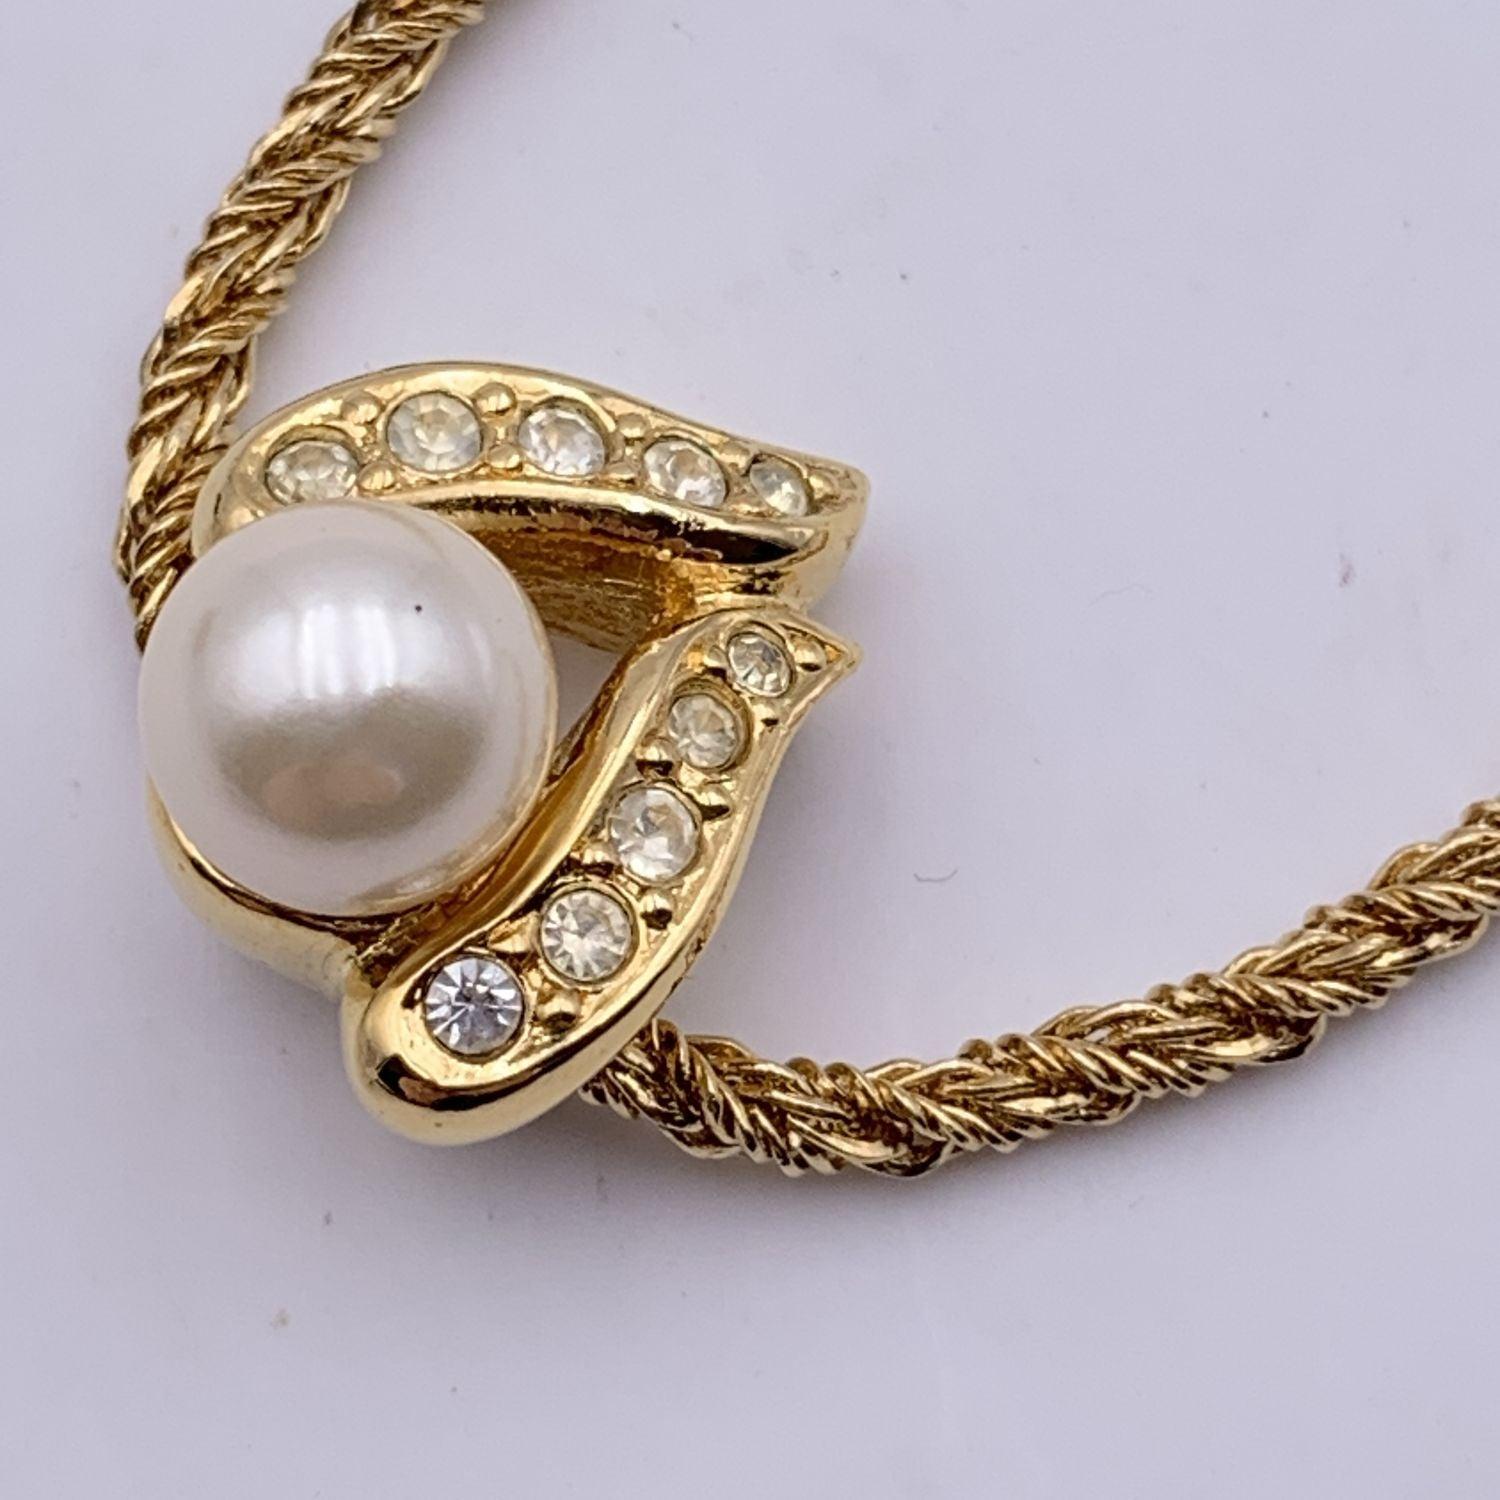 Women's Christian Dior Vintage Gold Metal Pearl Pendant Necklace